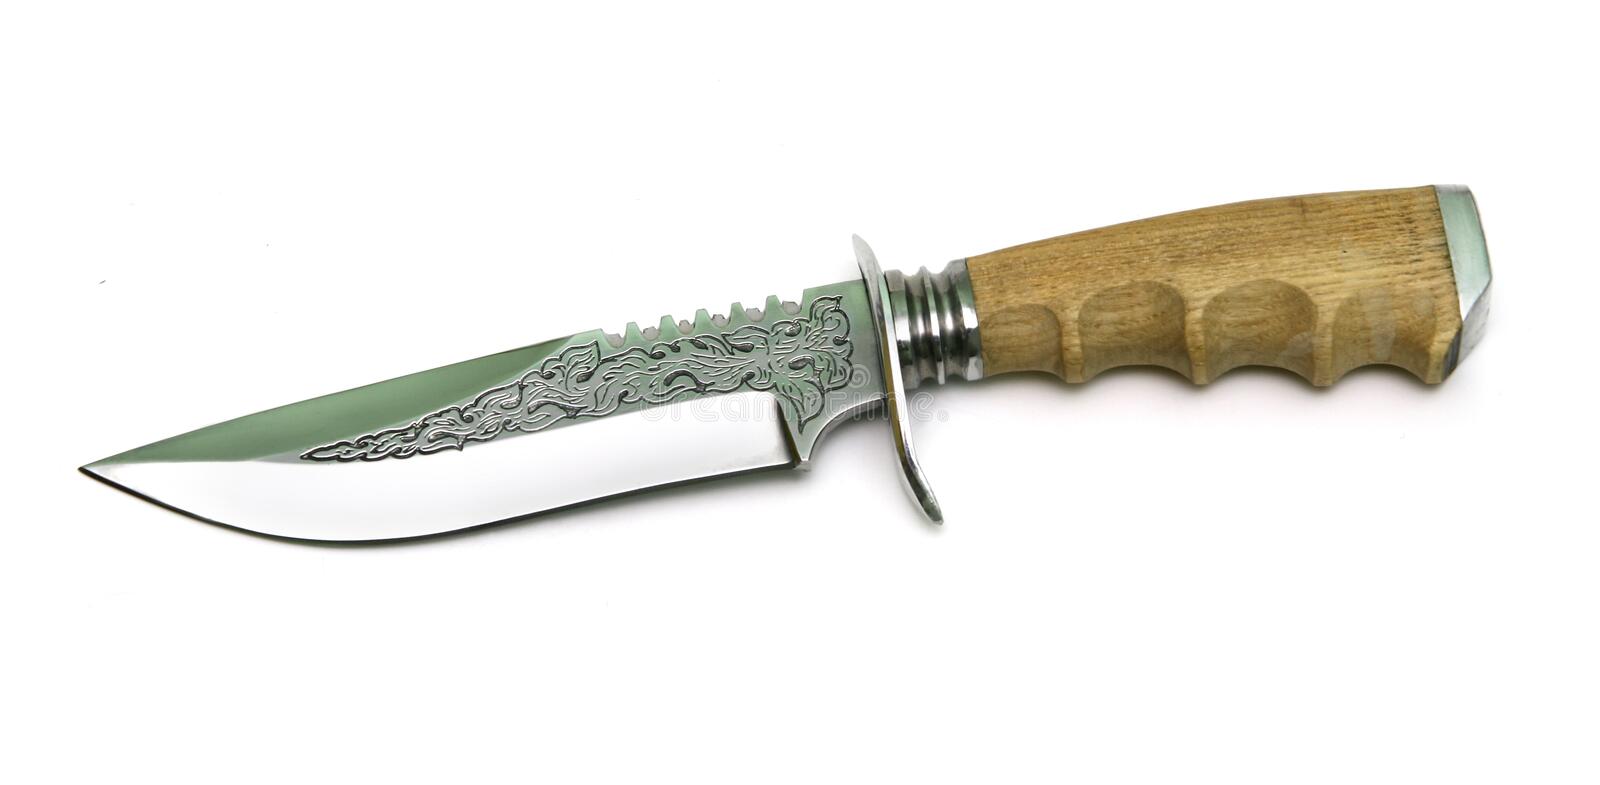 Buying A Hunting Knife